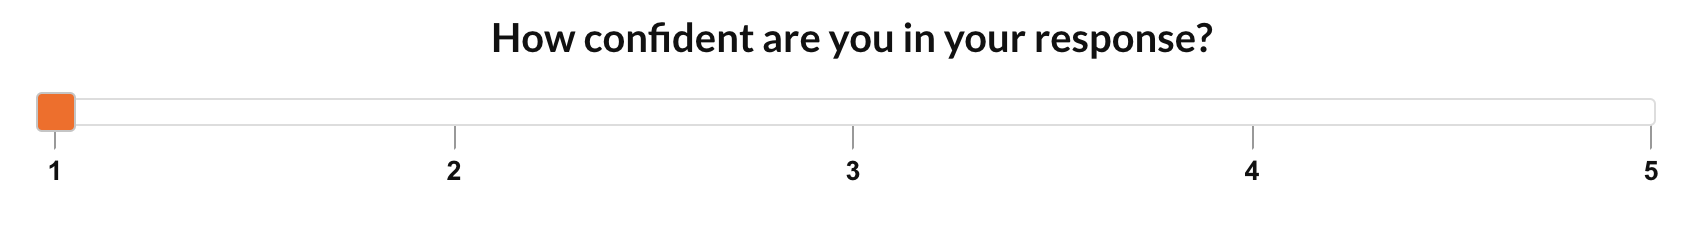 5-pt_likert_scale.png